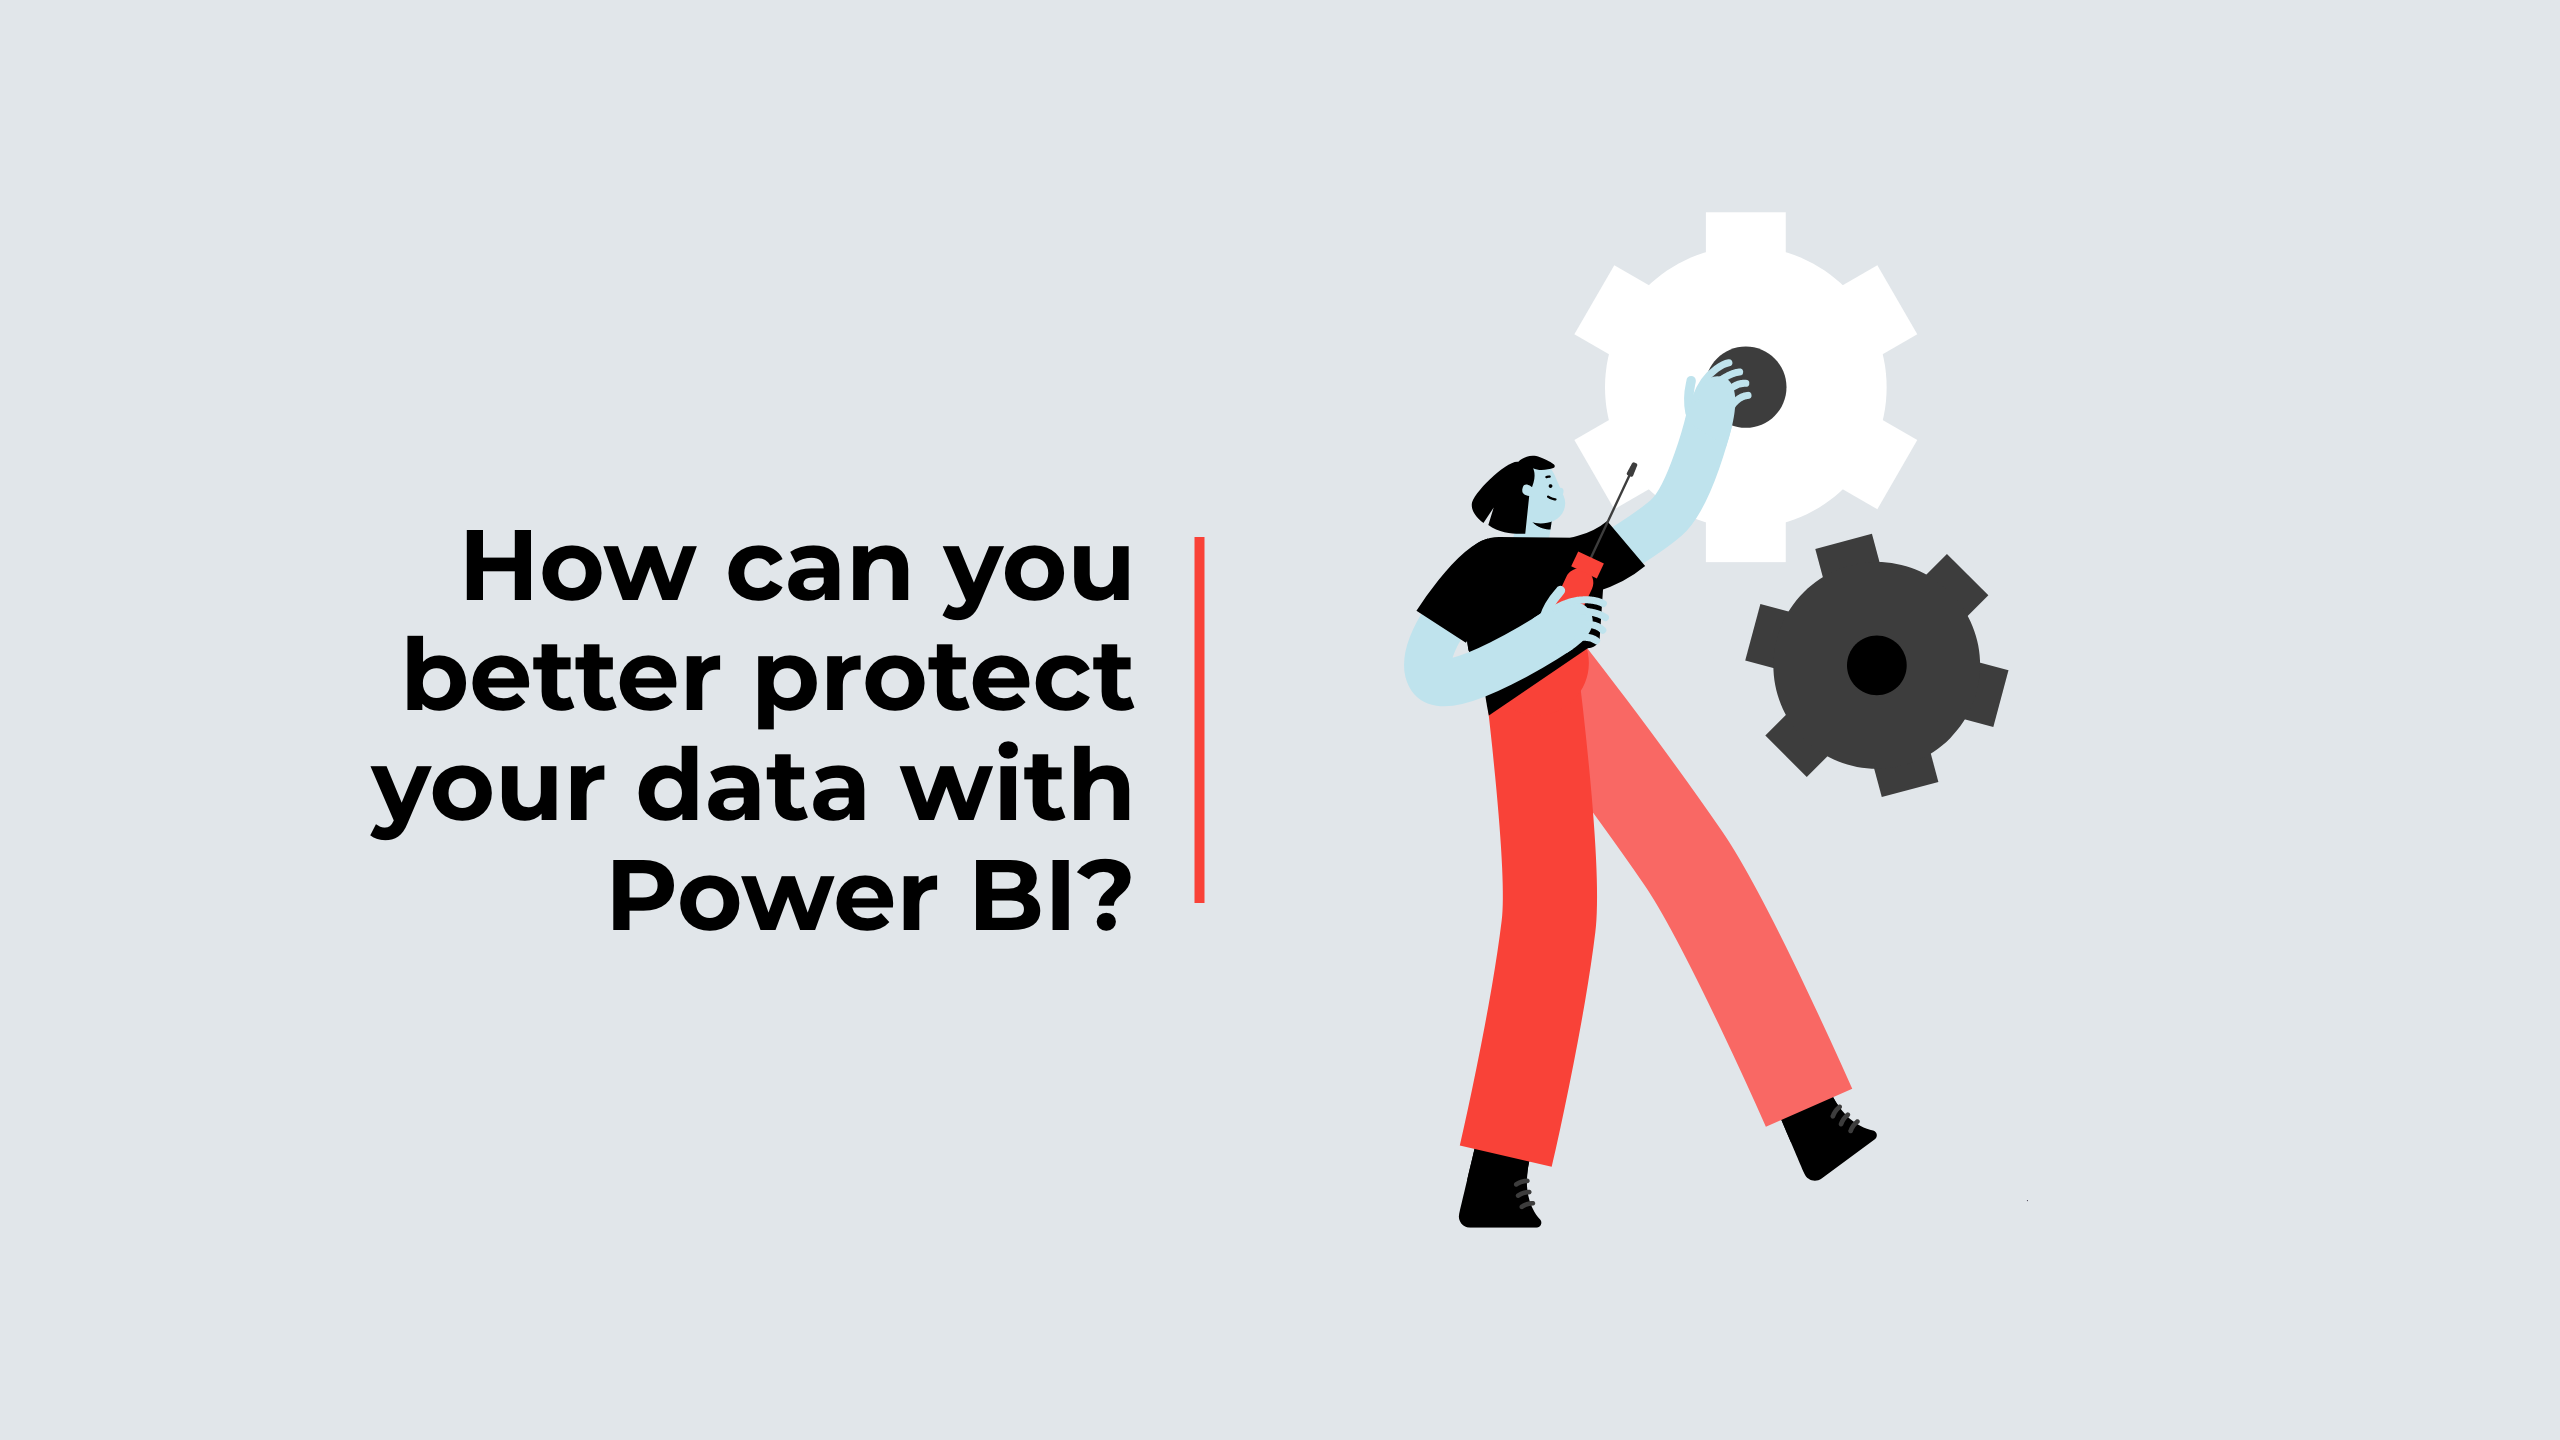 How can you better protect your data with Power BI?